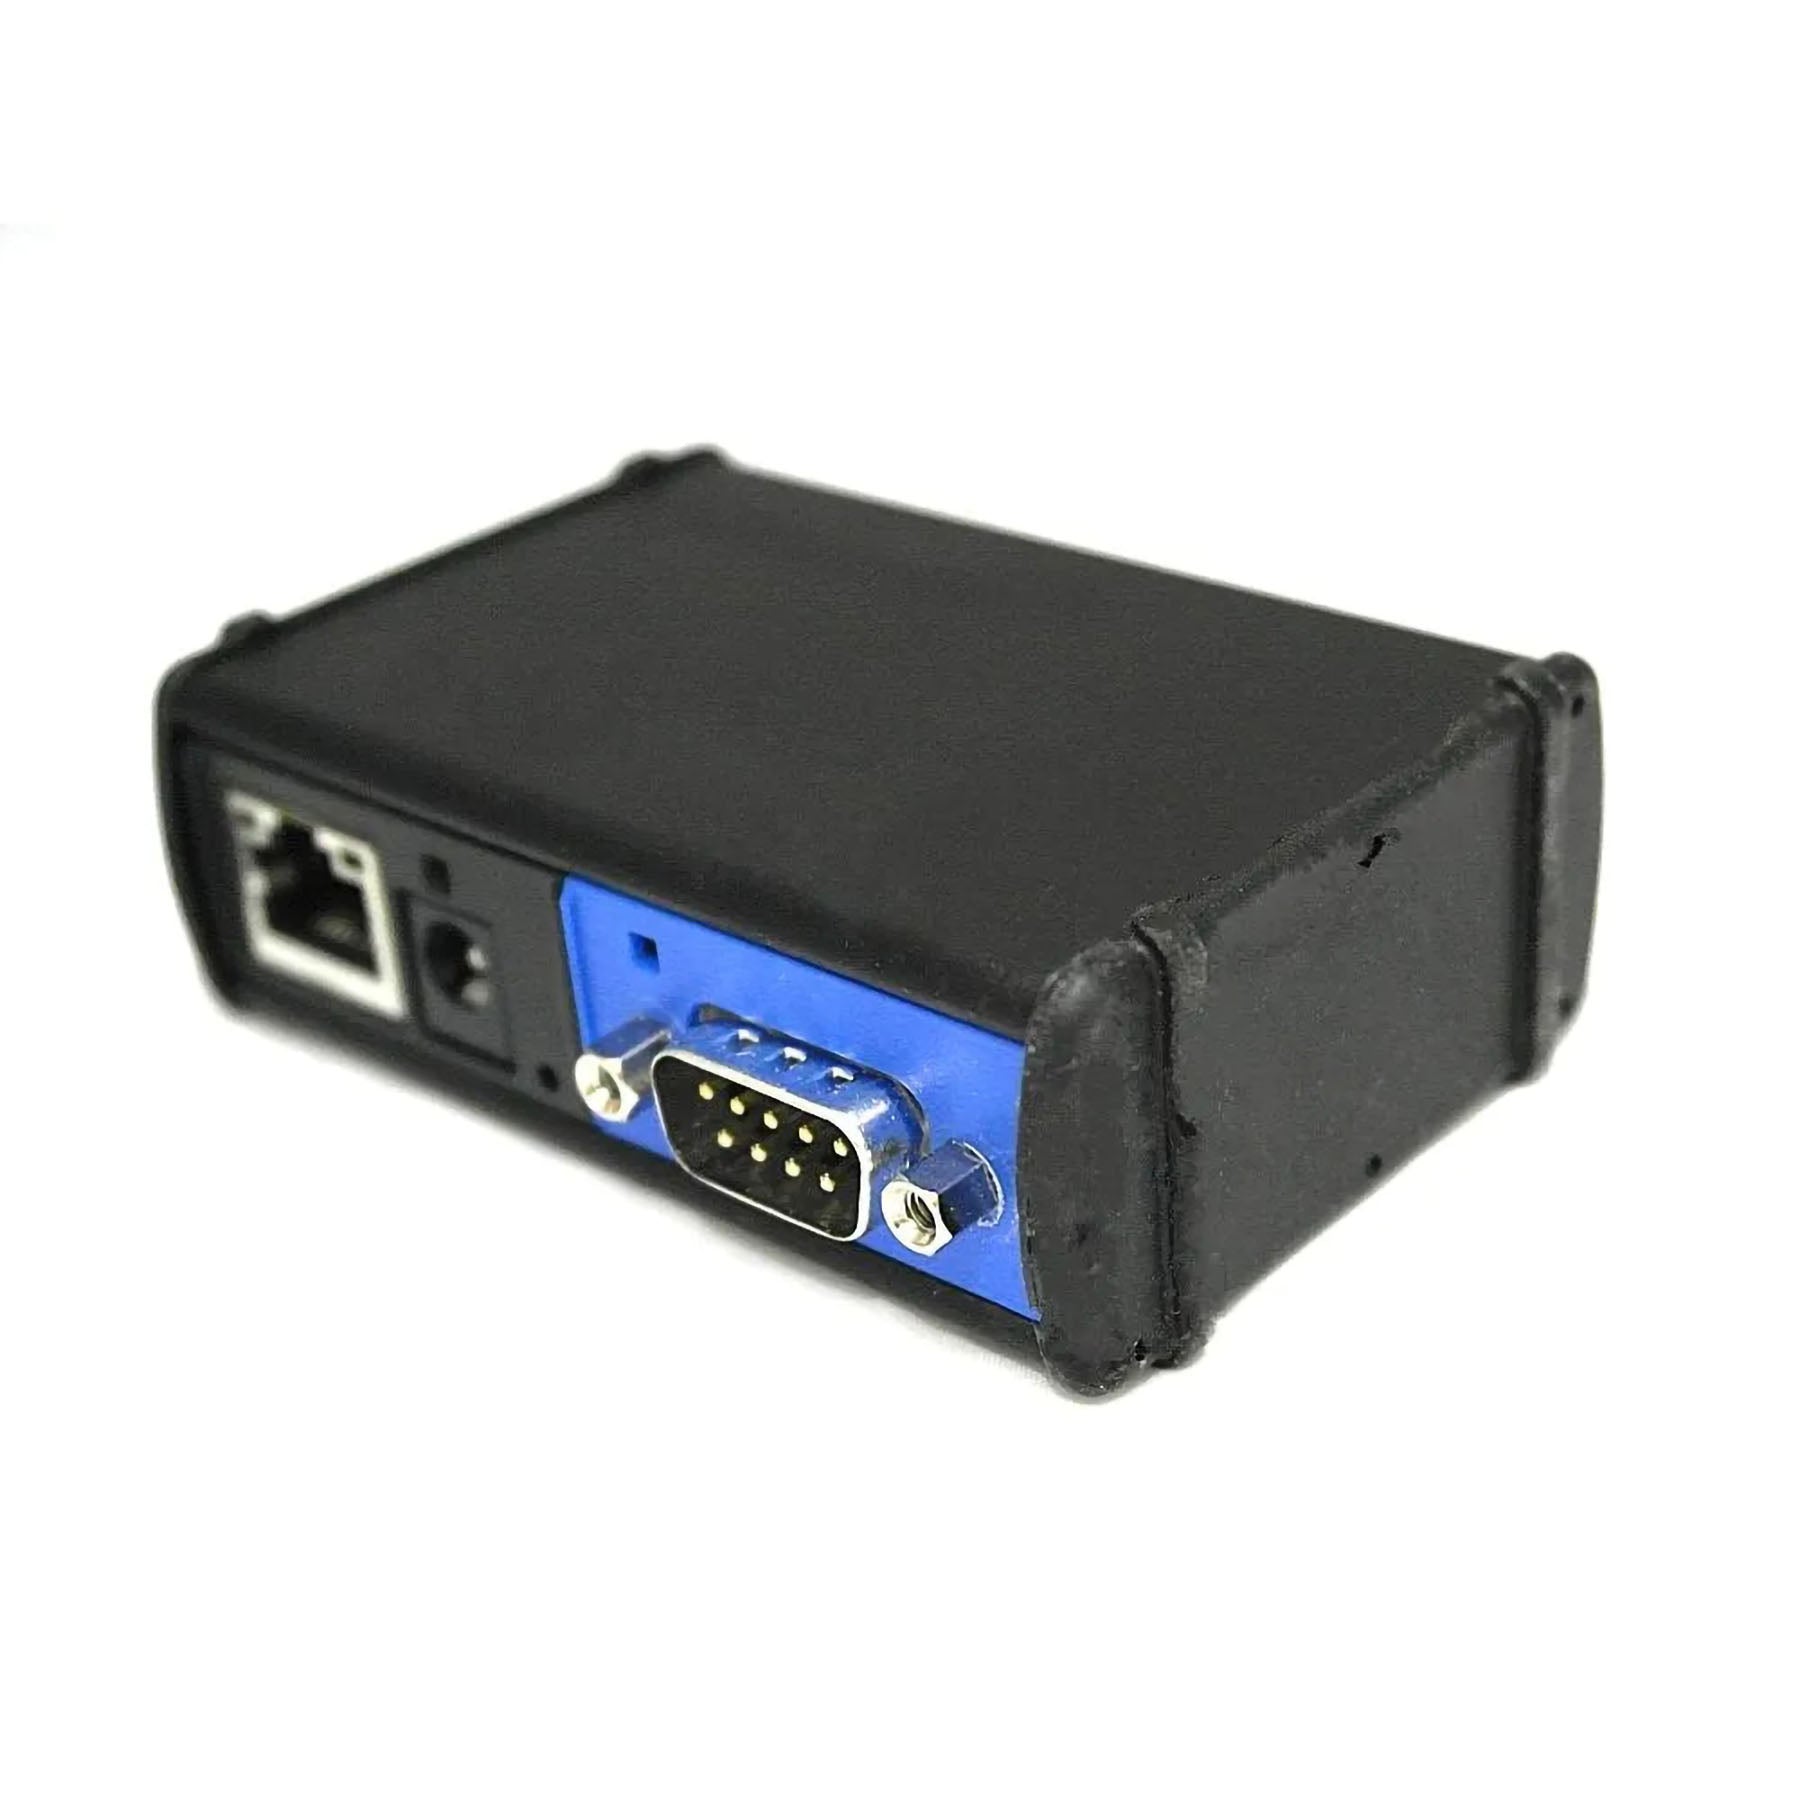 Revox Global Caché iTach wired TCP/IP to RS232